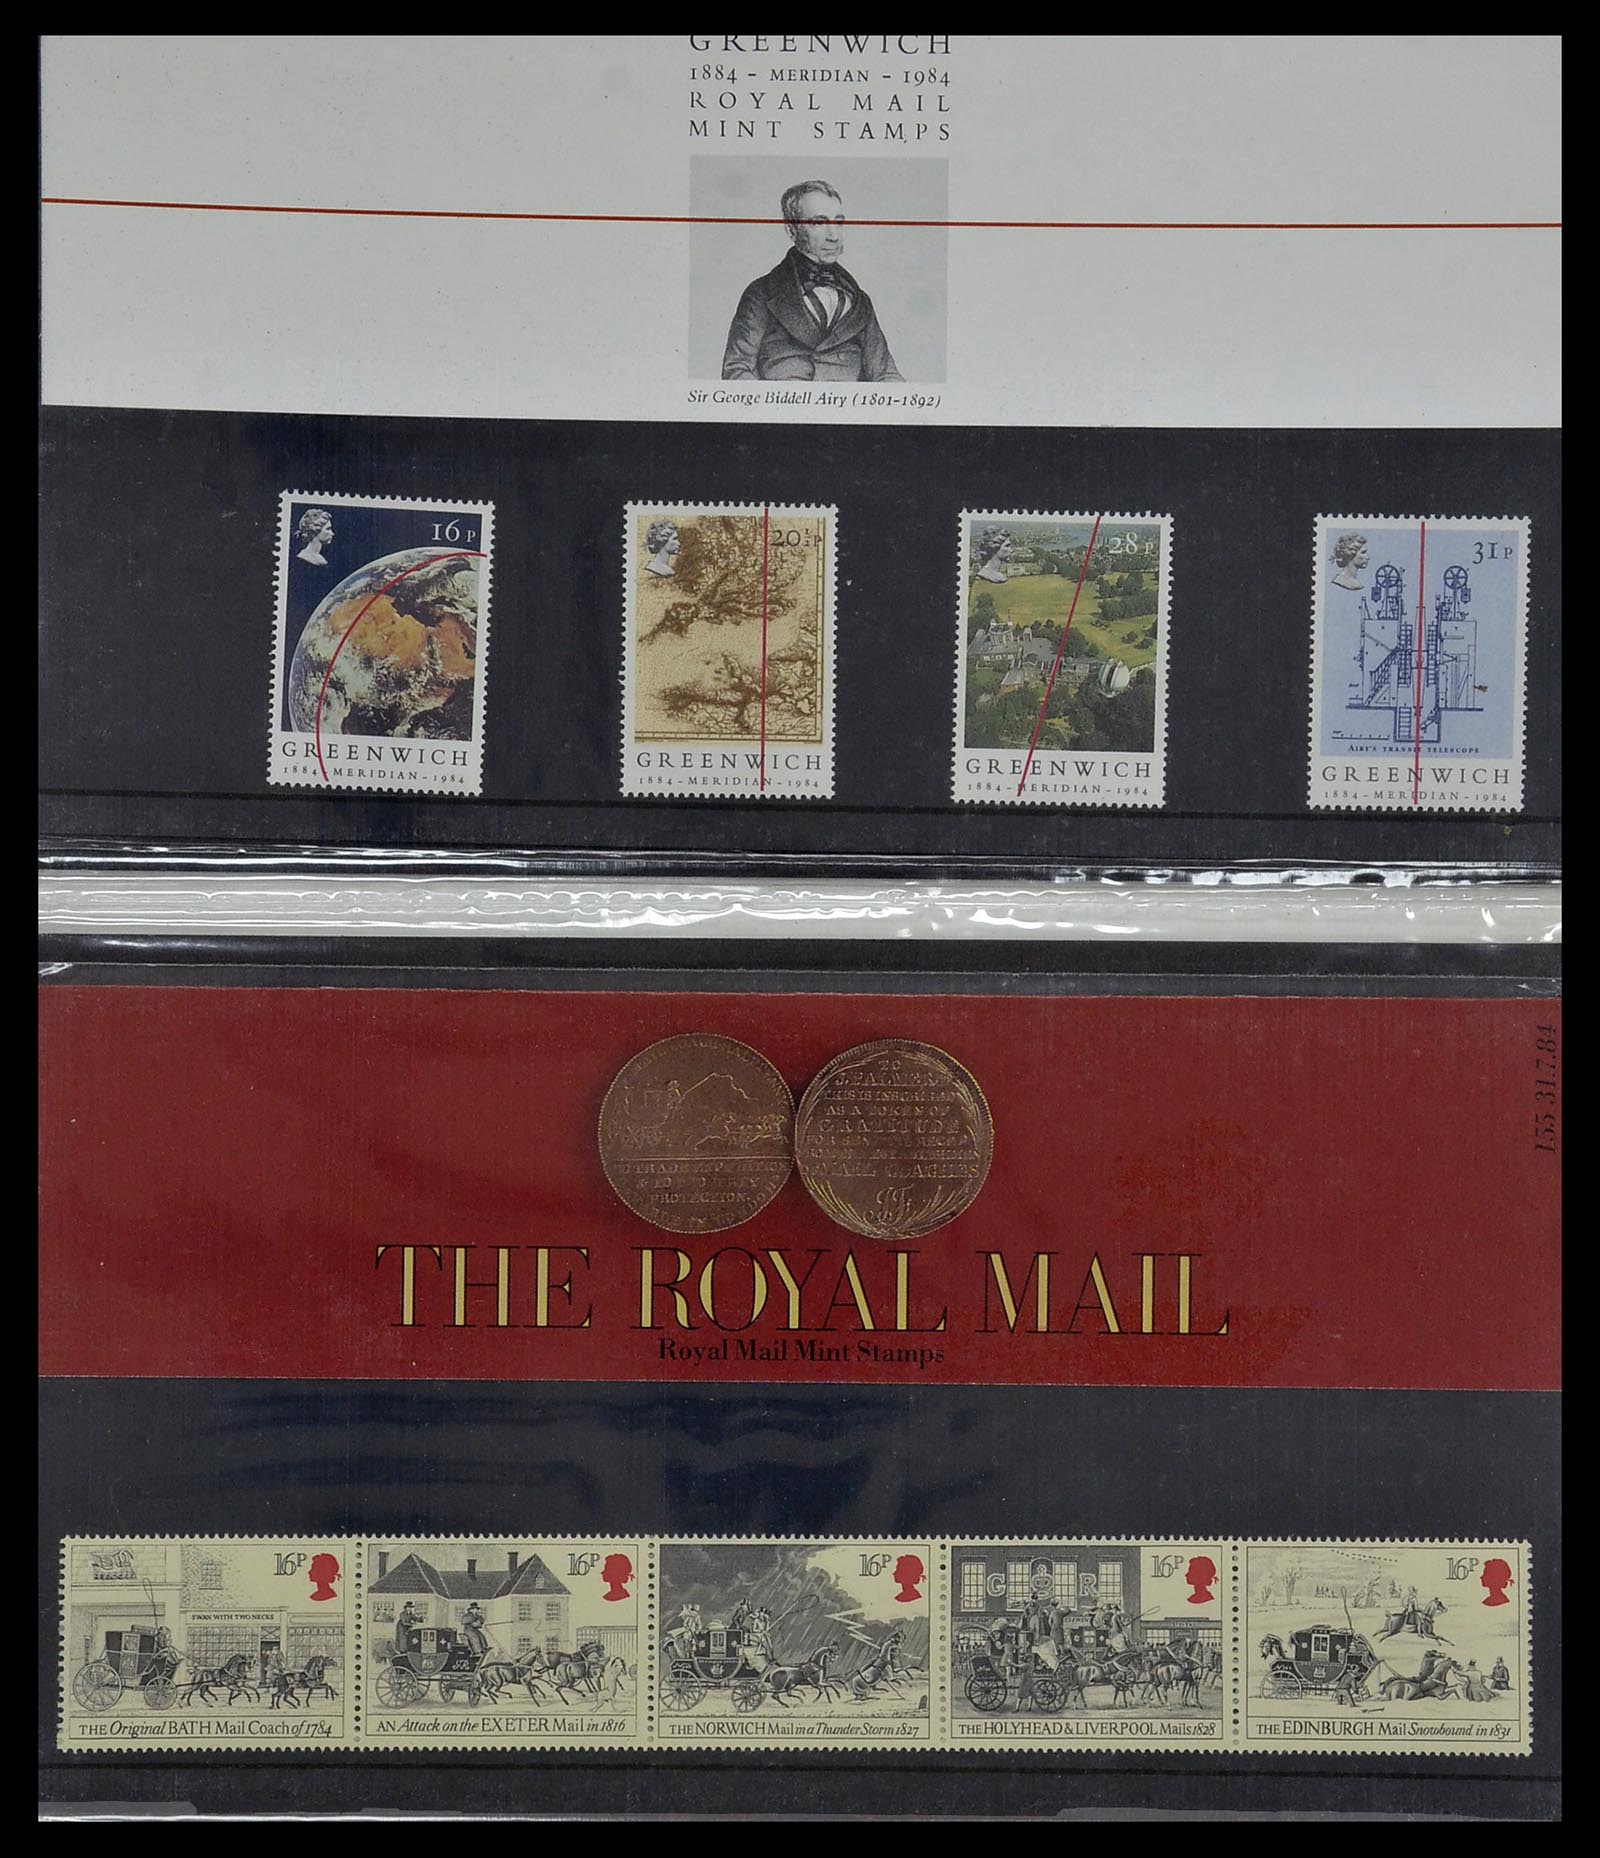 34029 023 - Stamp collection 34029 Great Britain presentation packs 1978-2004.